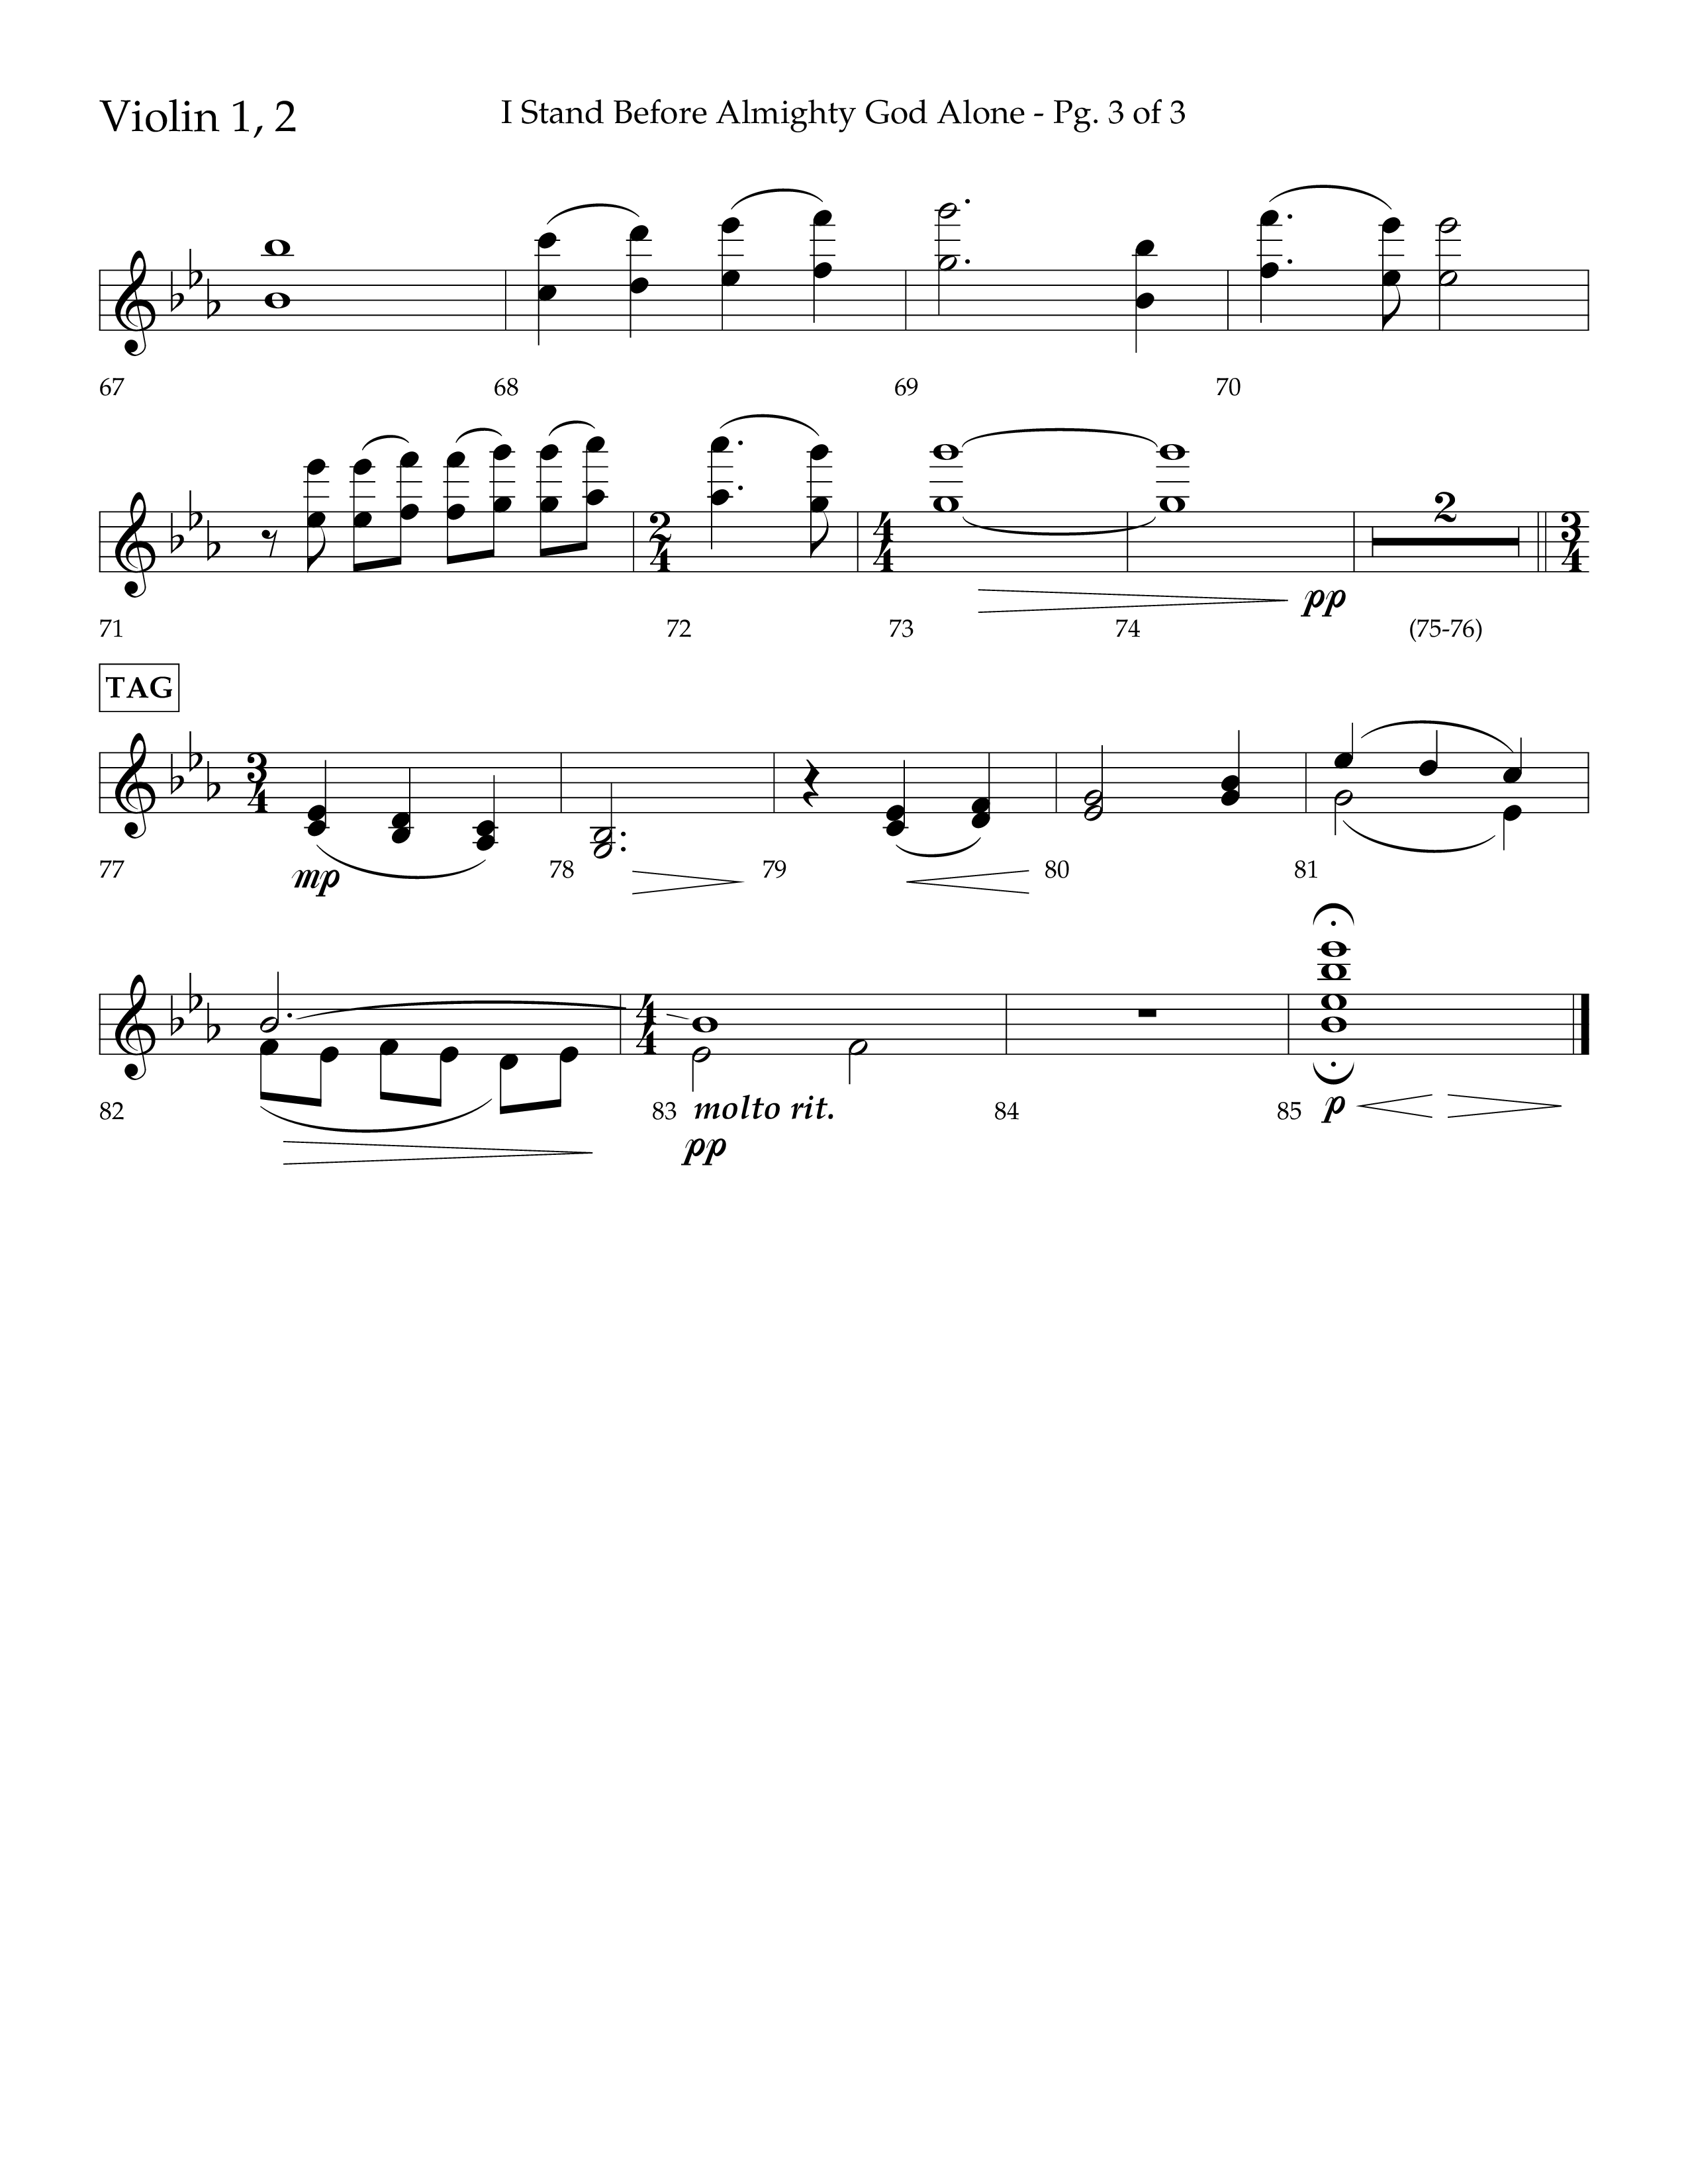 I Stand Before Almighty God Alone (Choral Anthem SATB) Violin 1/2 (Lifeway Choral / Arr. Craig Adams / Orch. Phillip Keveren)